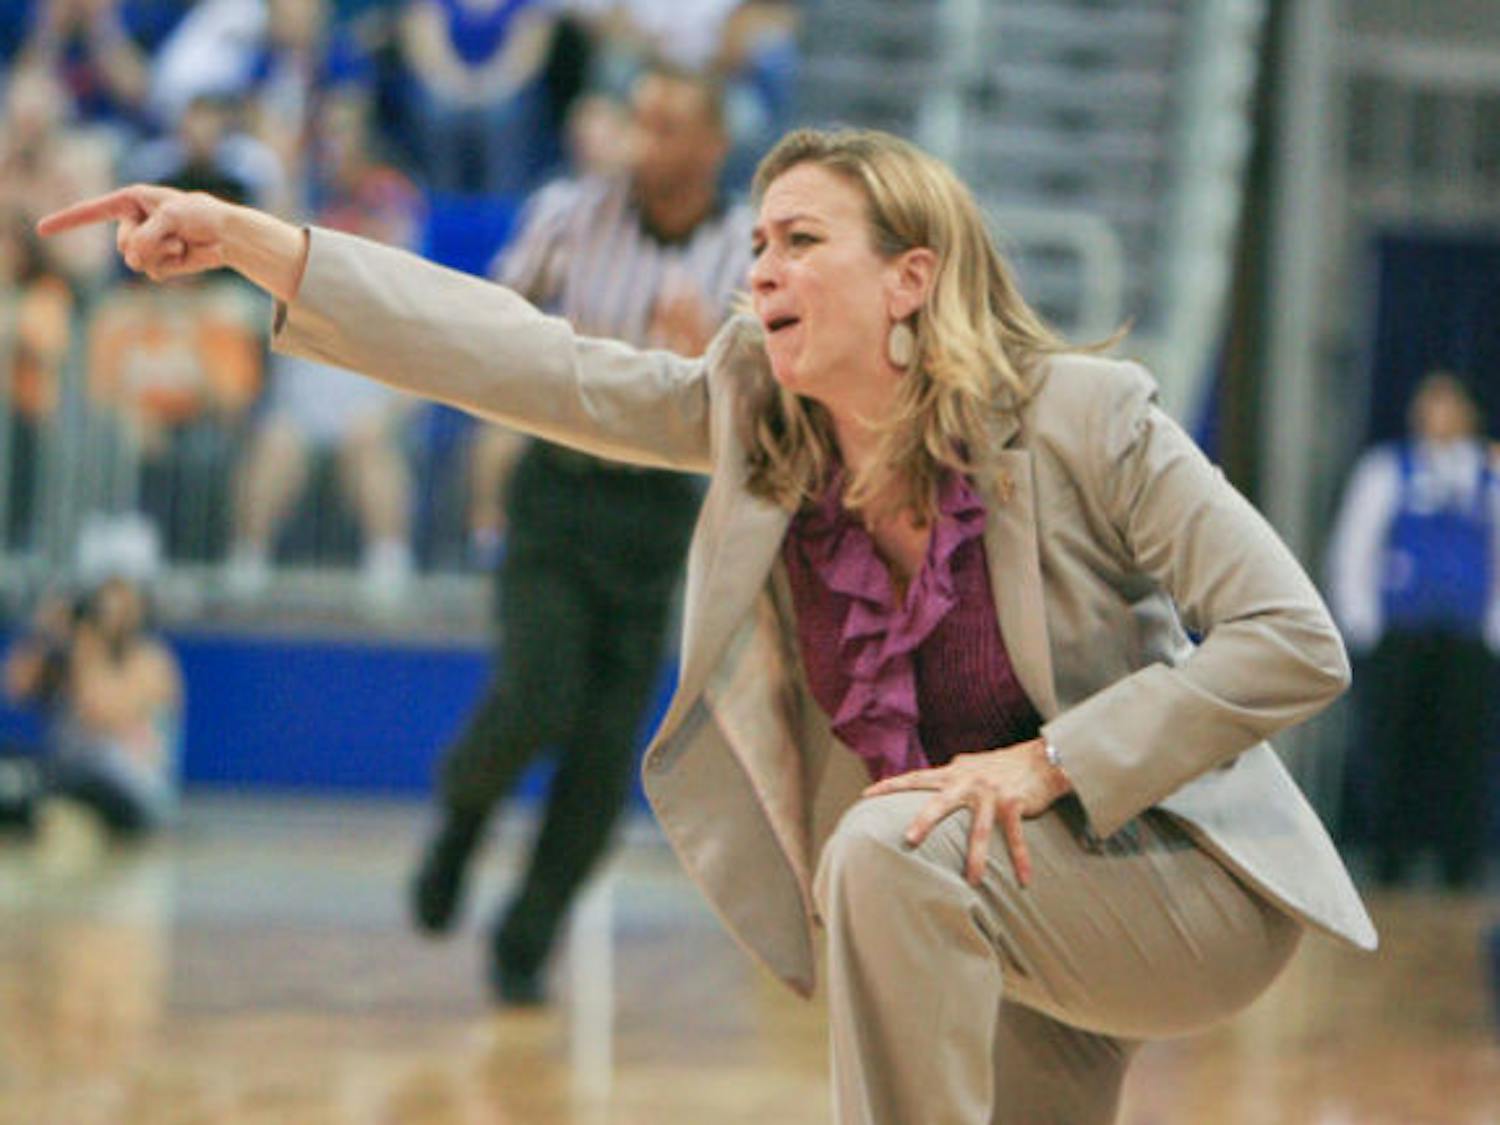 Coach Amanda Butler reacts to a play during Florida’s 78-75 overtime loss to No. 9 Tennessee on Sunday in the O’Connell Center.